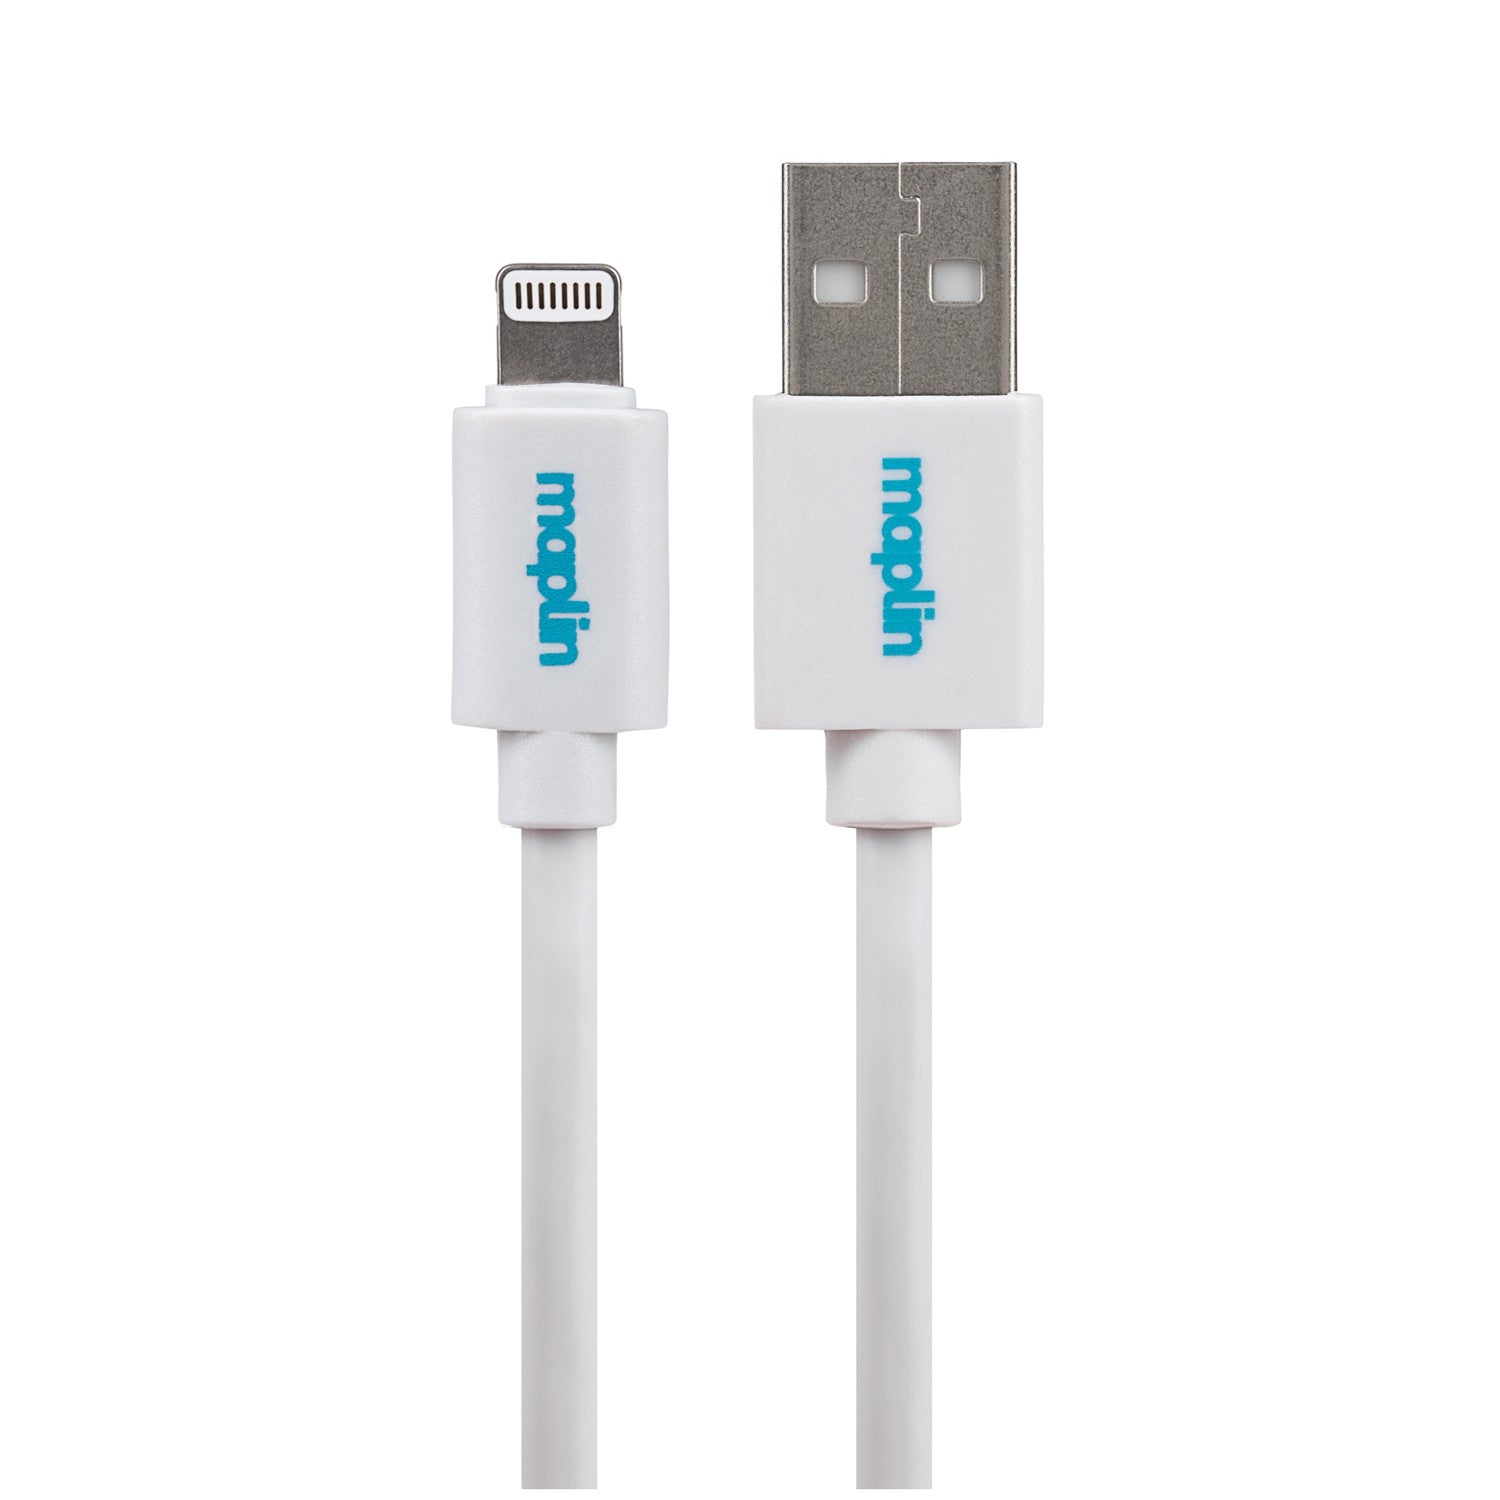 Maplin Premium Apple MFI Certified Tangle-Free Lightning to USB-A 2.0 Cable - White, 1.5m